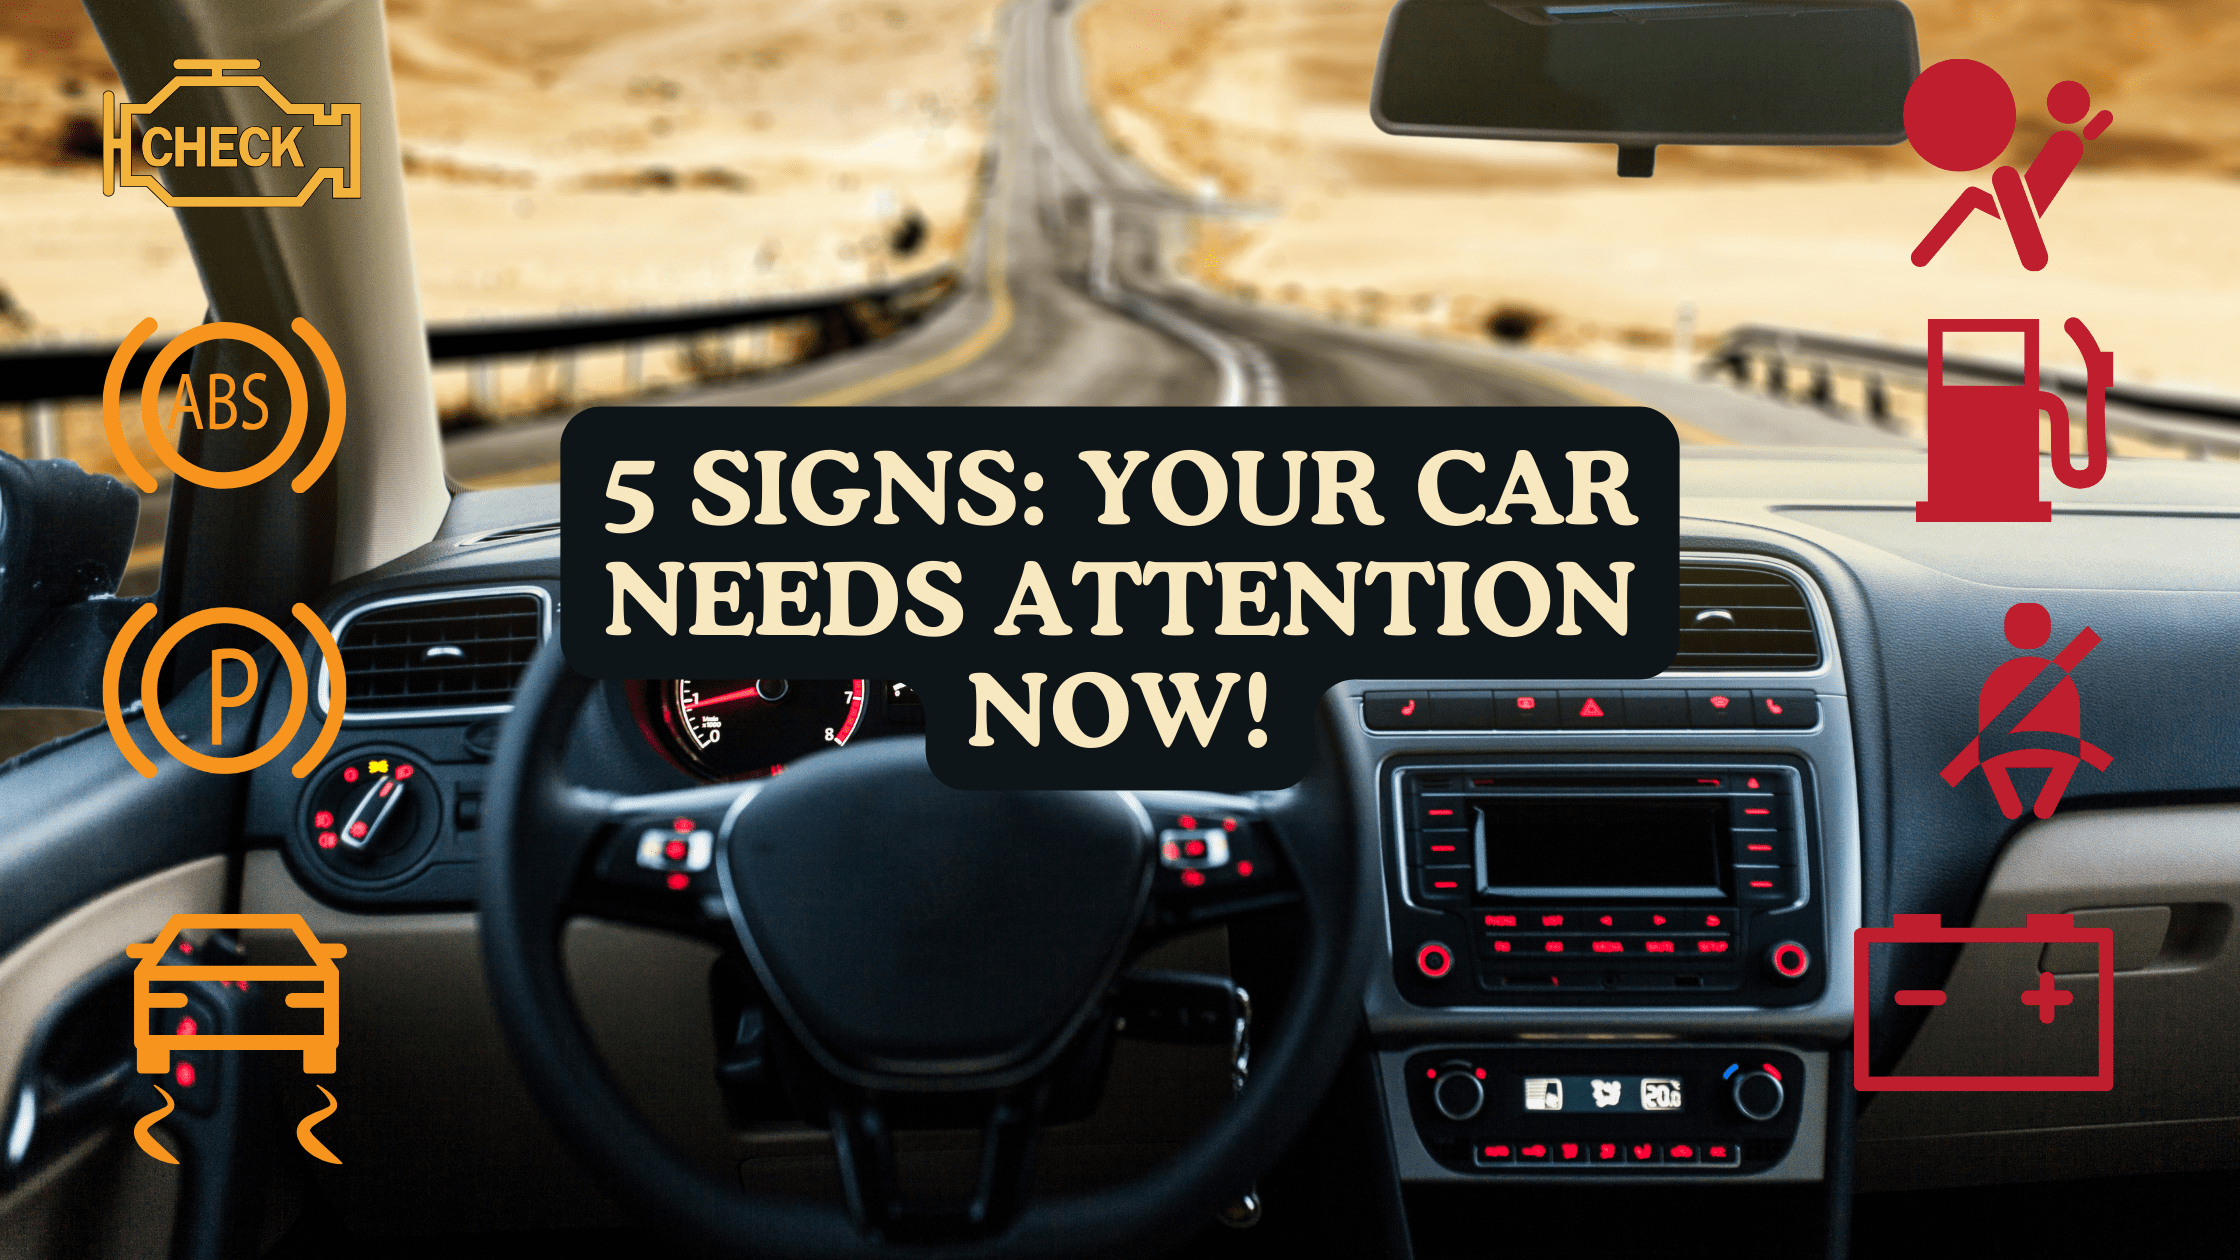 5 Signs Your Car Needs Immediate Attention!